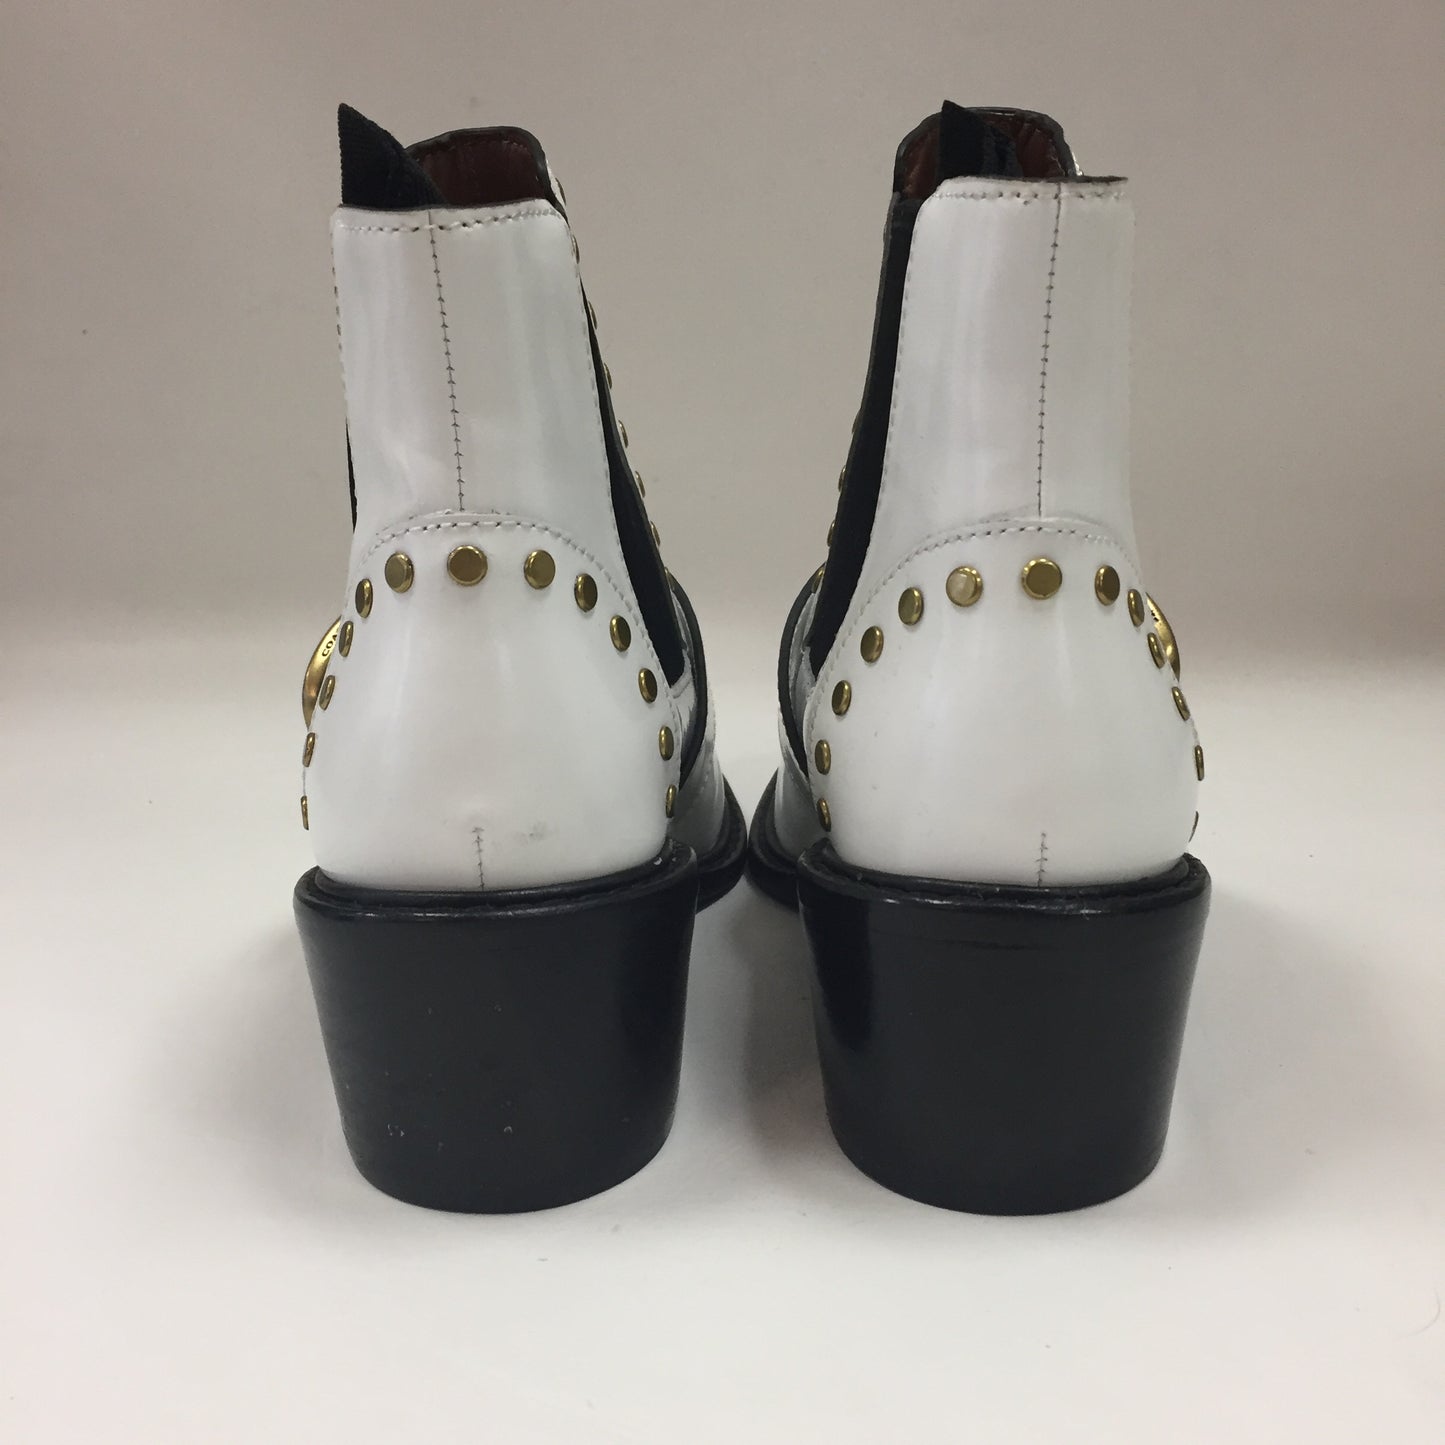 Authentic Coach White/Black Nora Chelsea Studded Leather Boots Women's Size 5